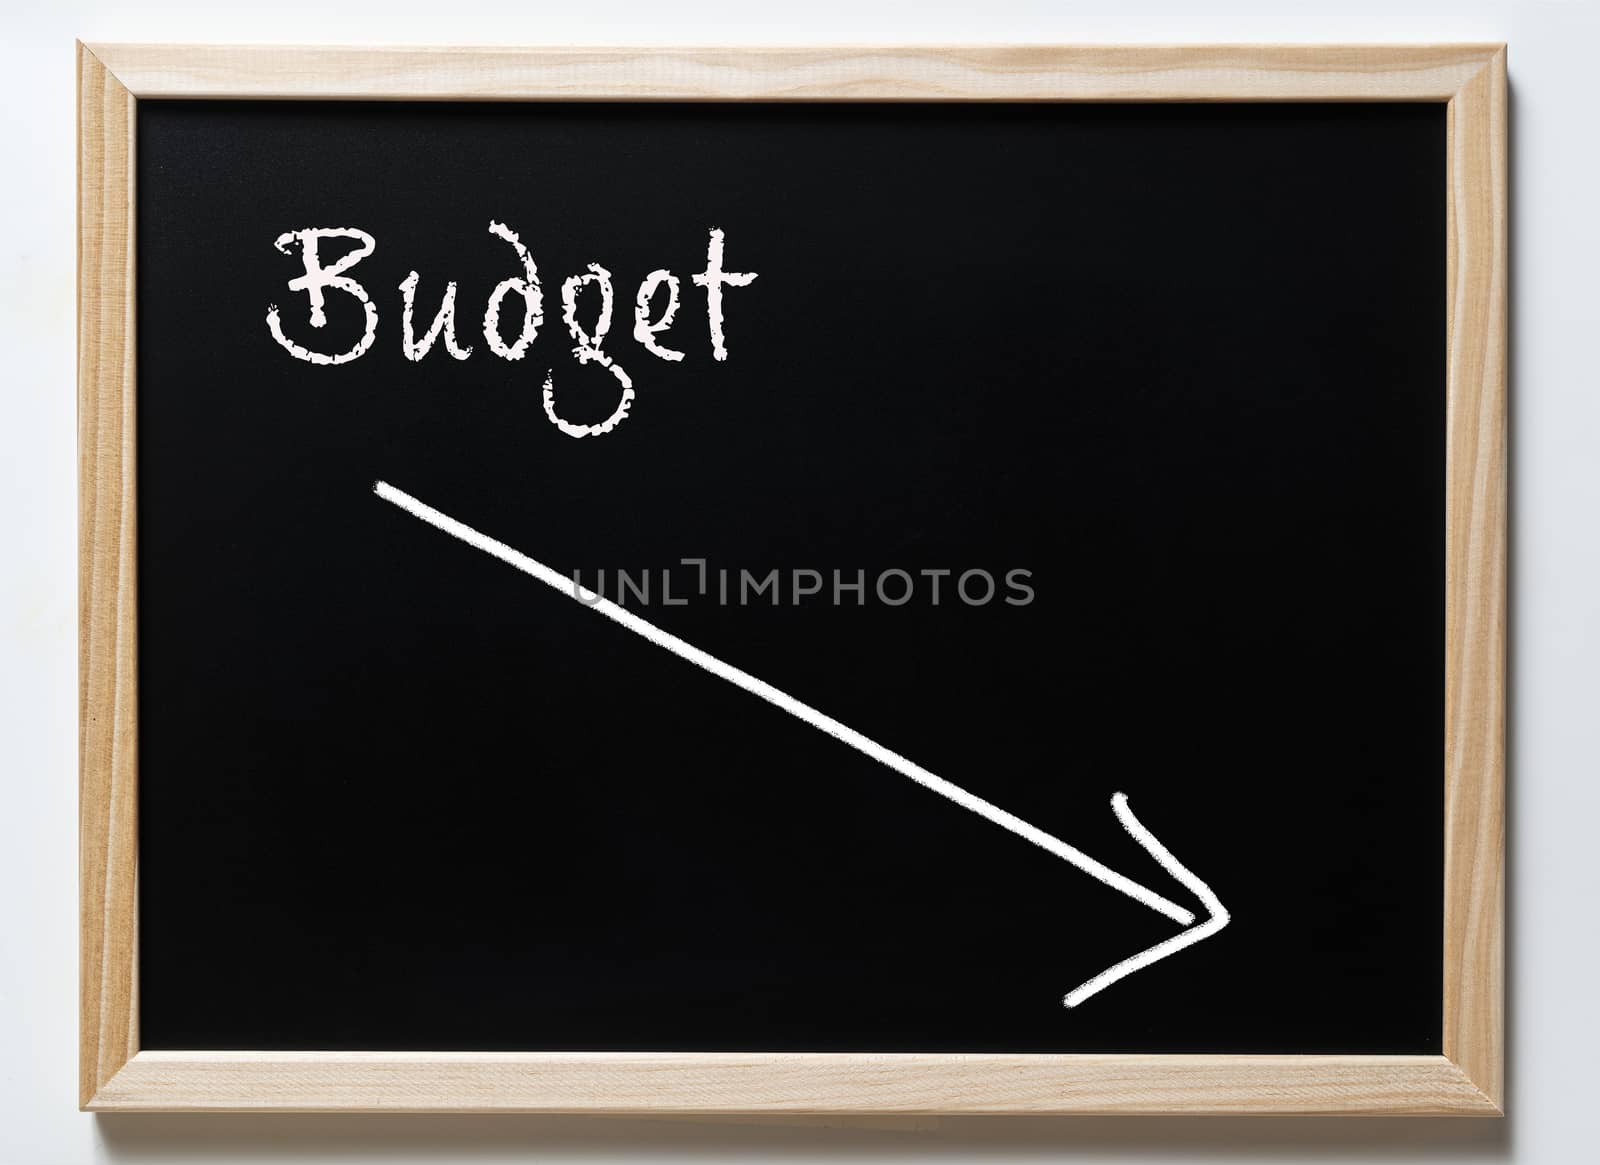  the word budget by sergiodv